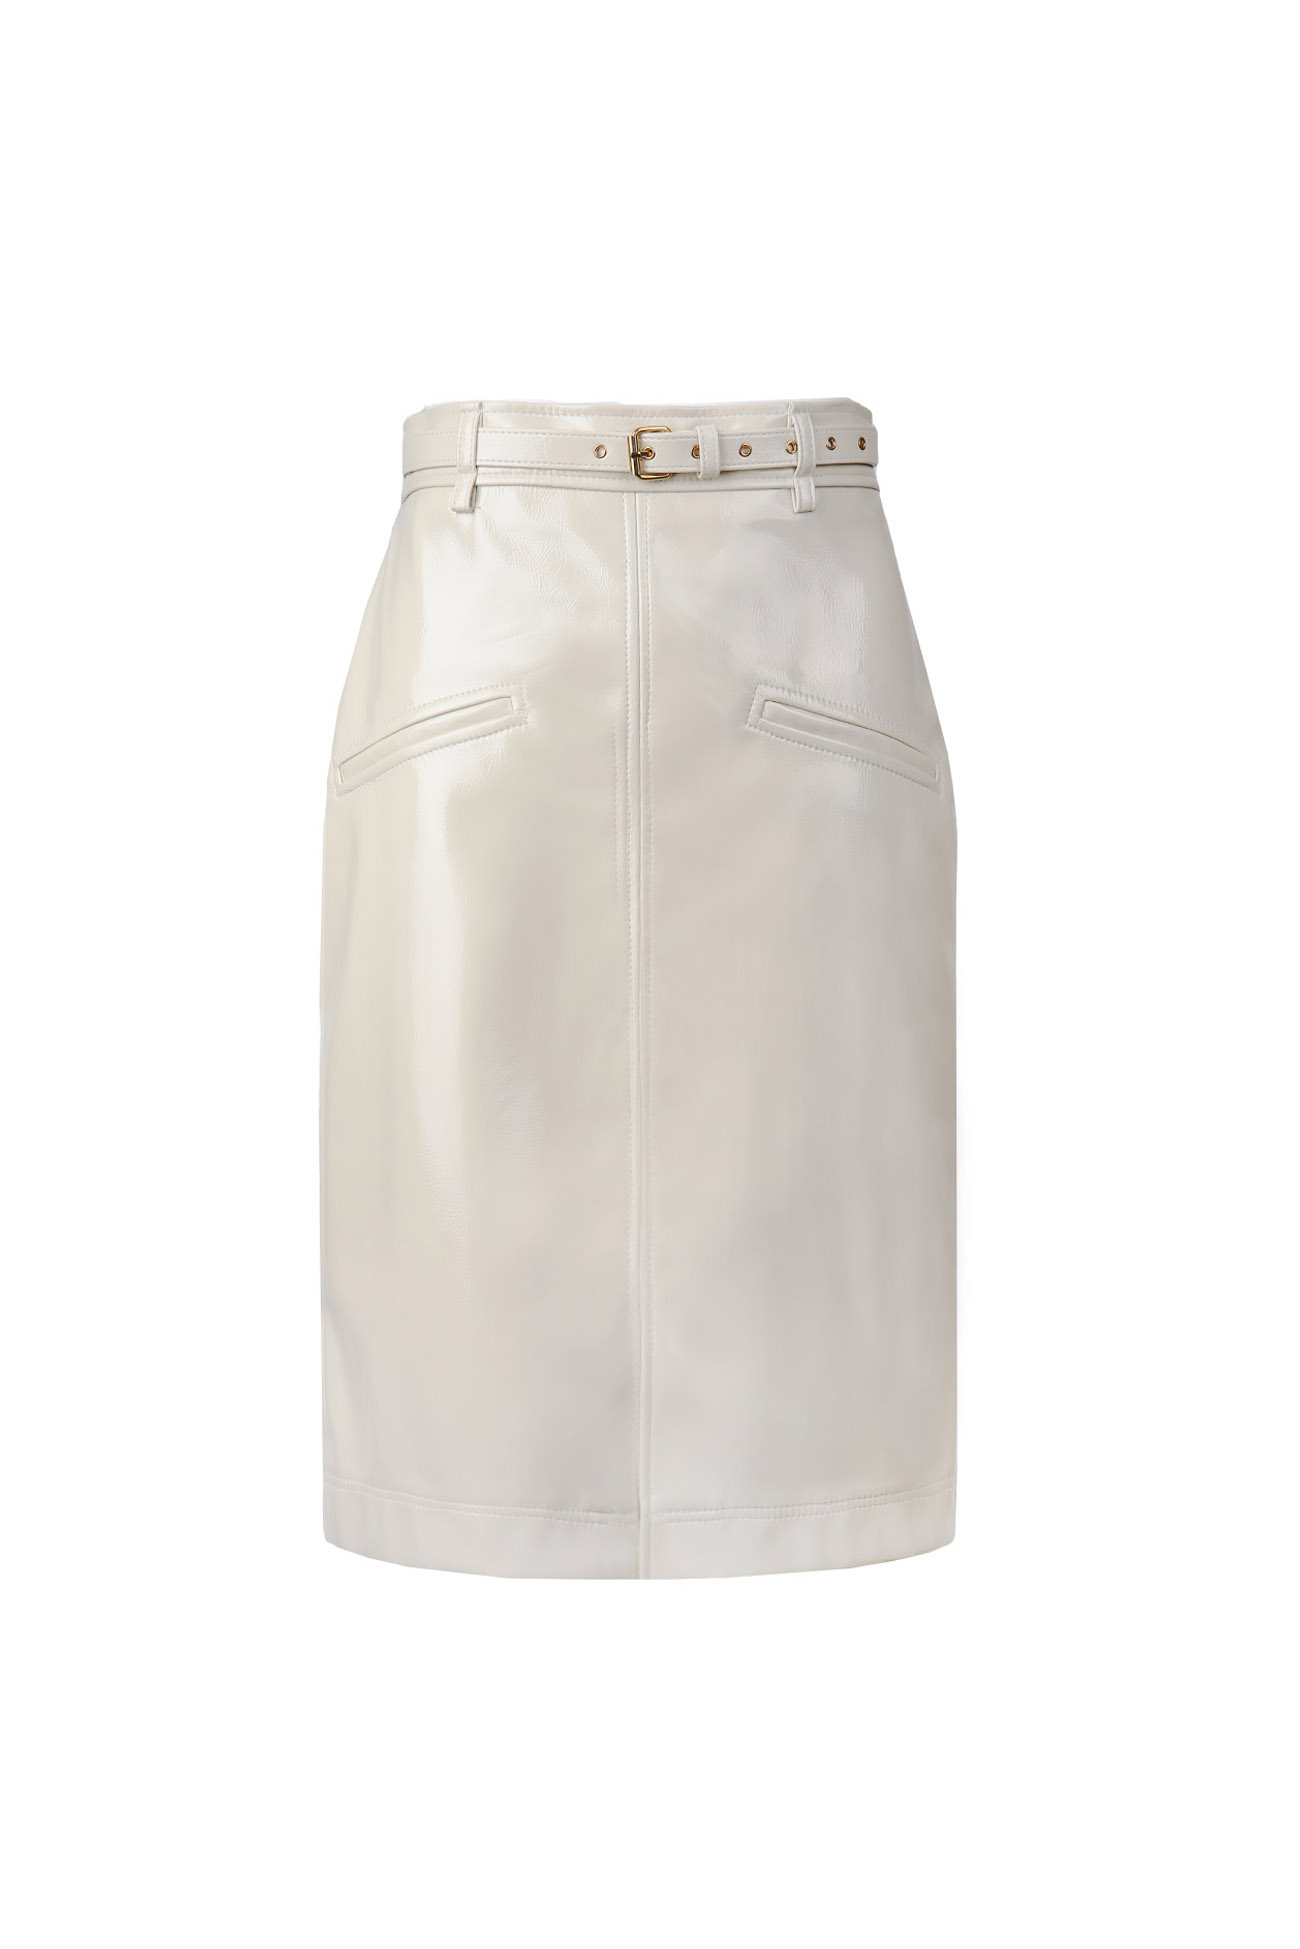 HIGH QUALITY LINE - BELTED SKIRT (IVORY)